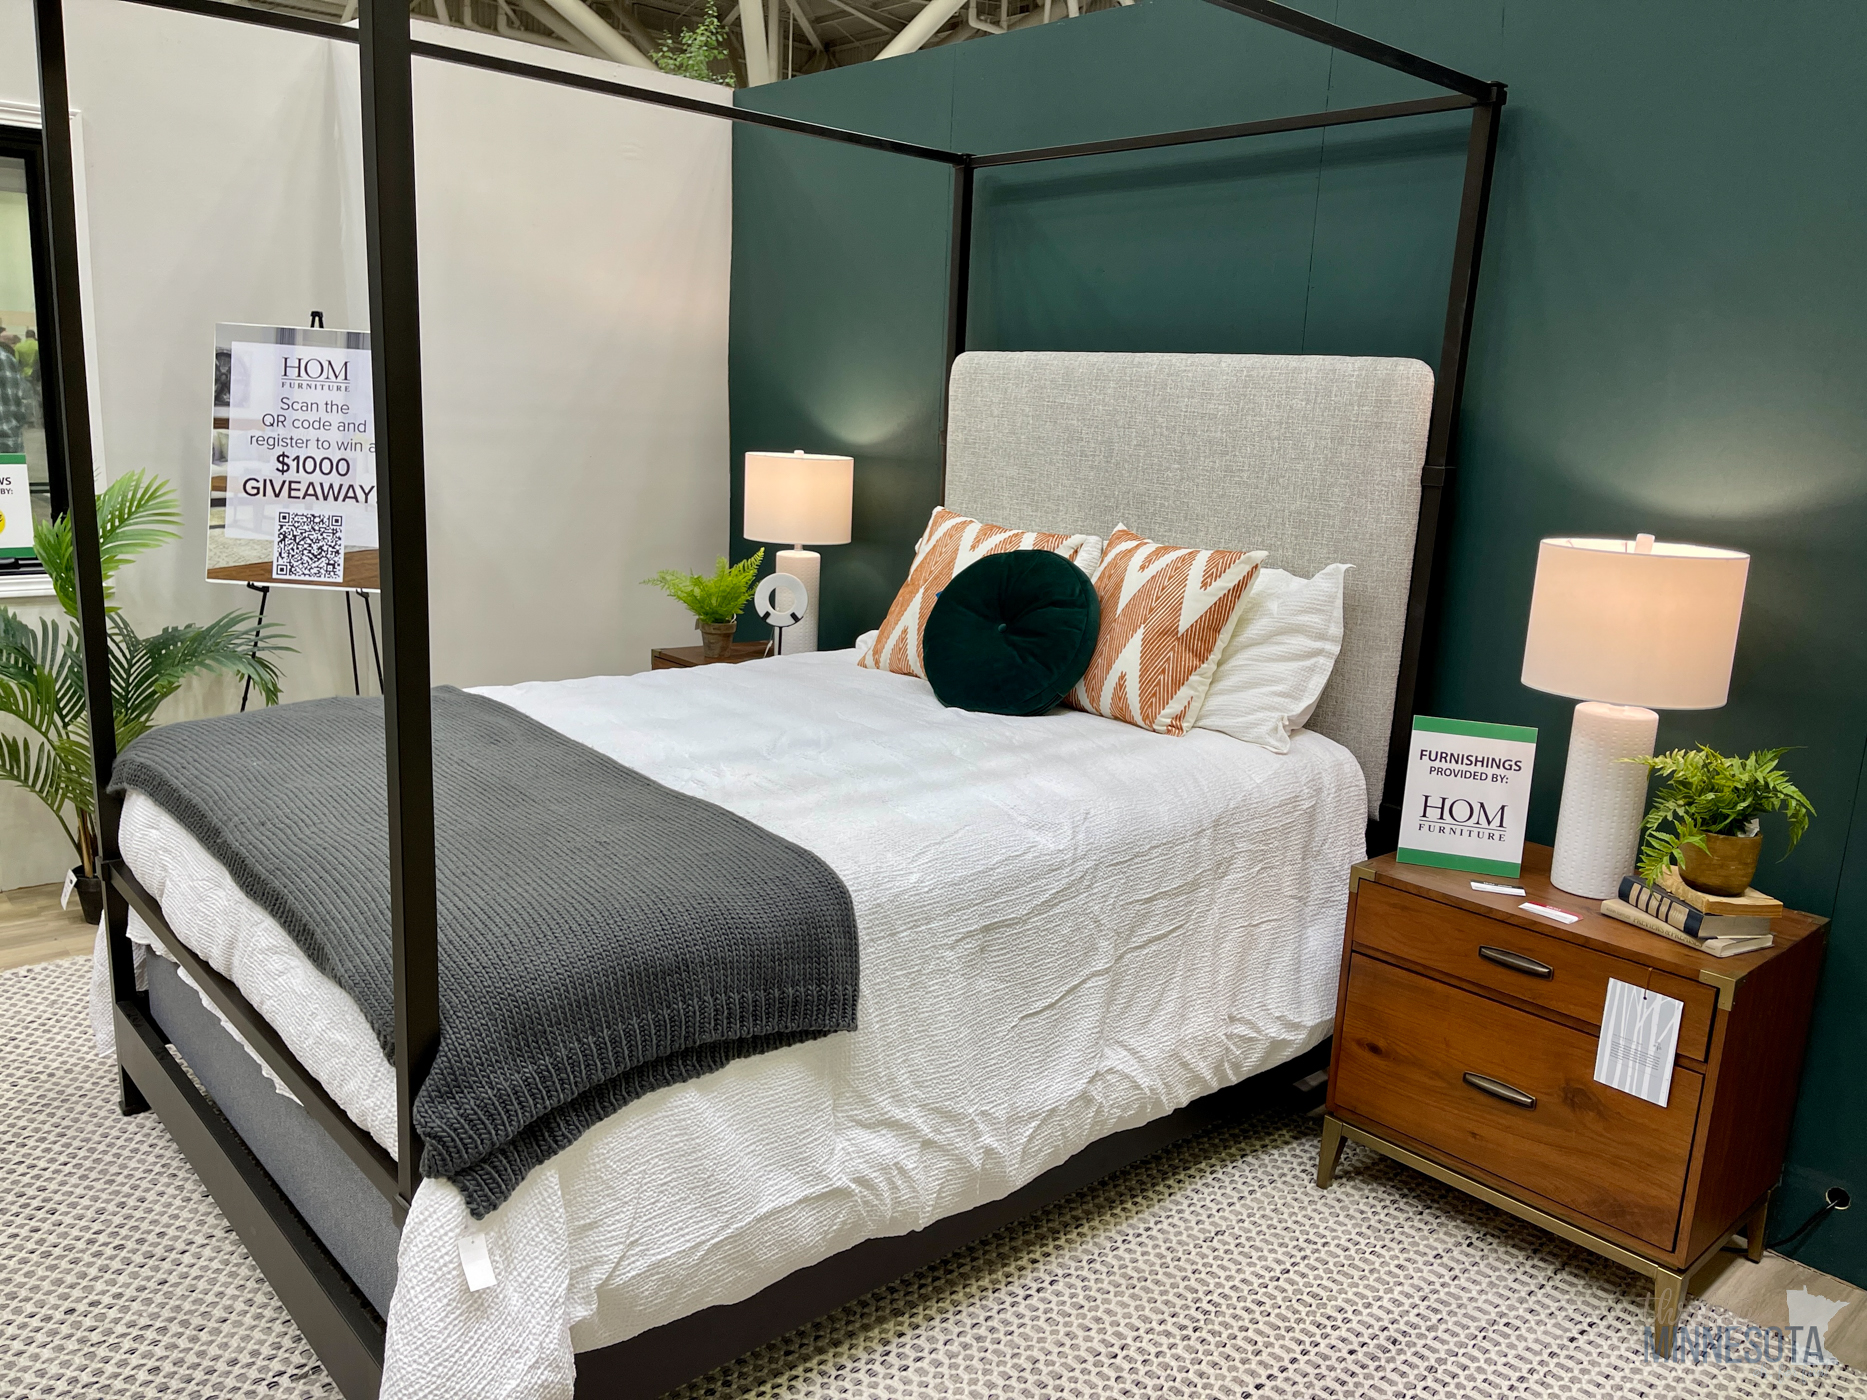 Bedroom Design and Minneapolis Home Show.